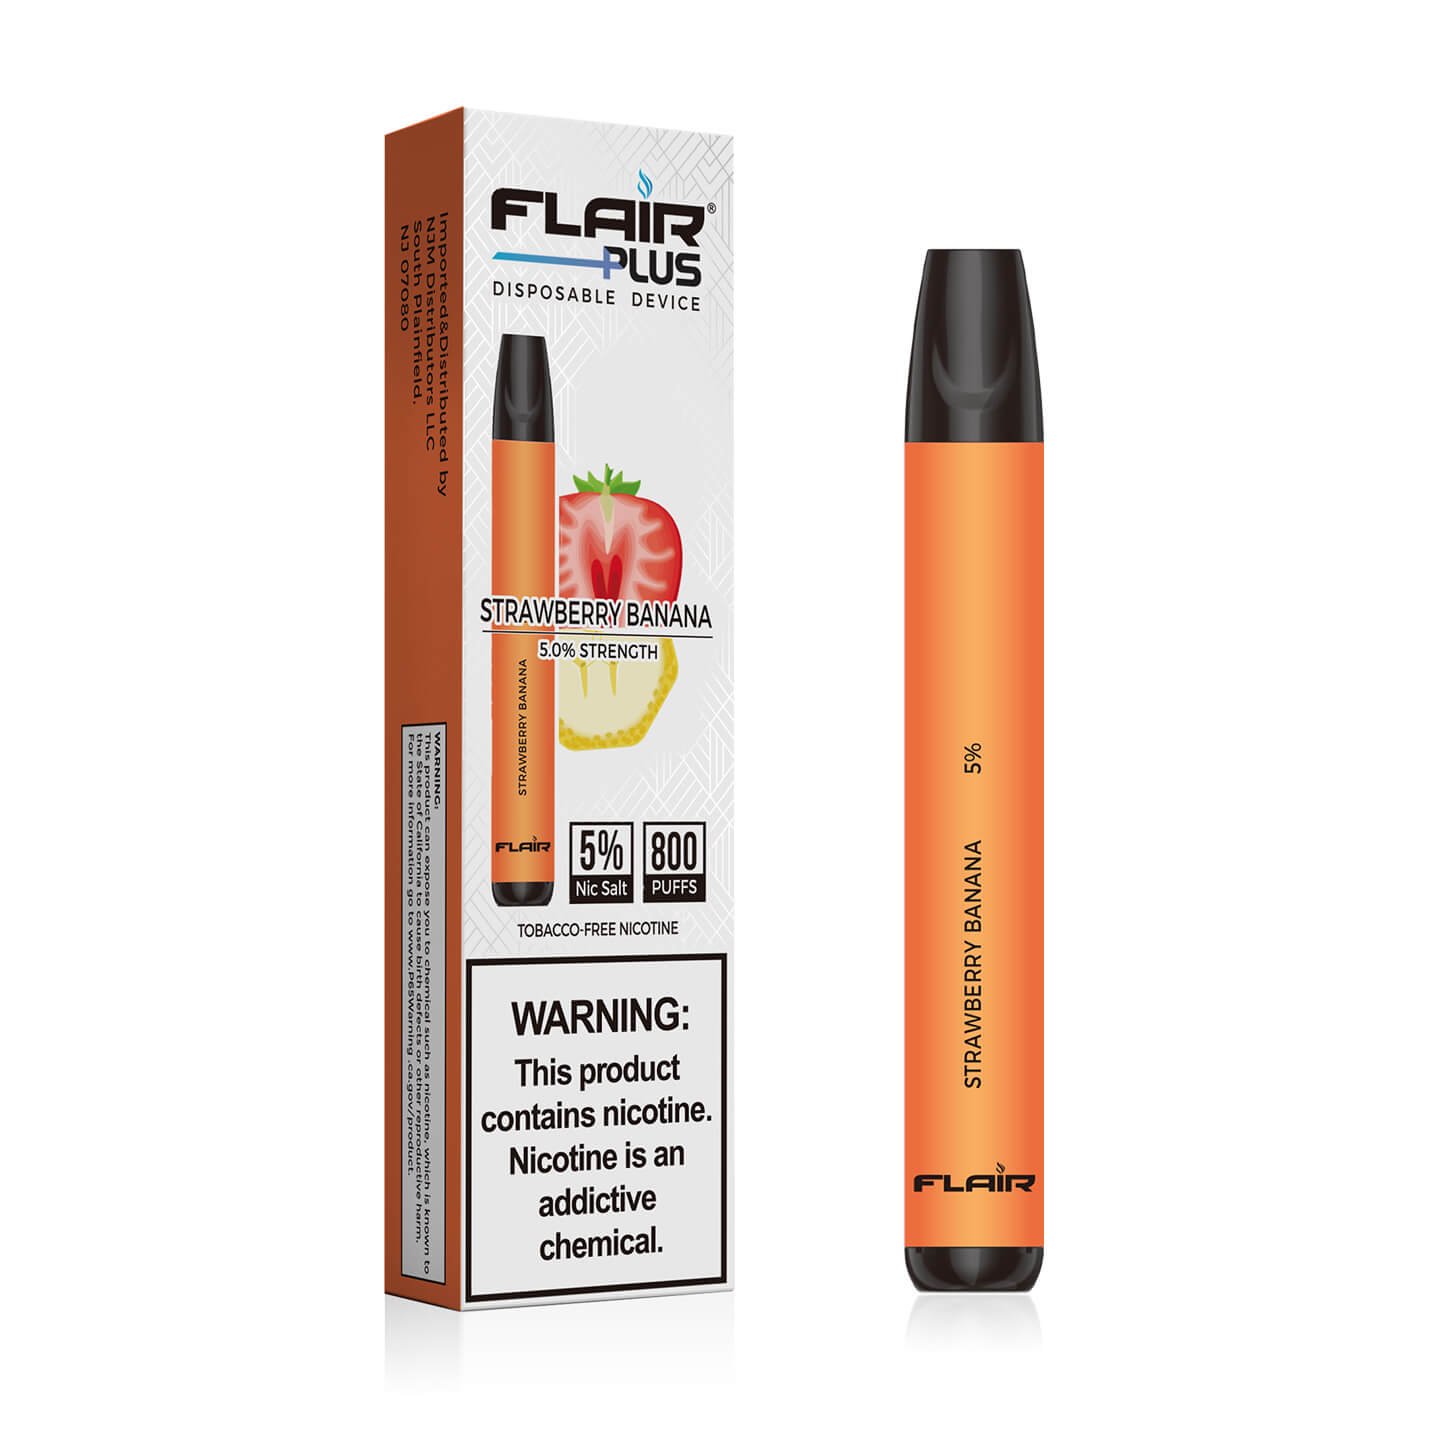 Flair Plus Disposable Devices (Strawberry Banana - 800 Puffs)